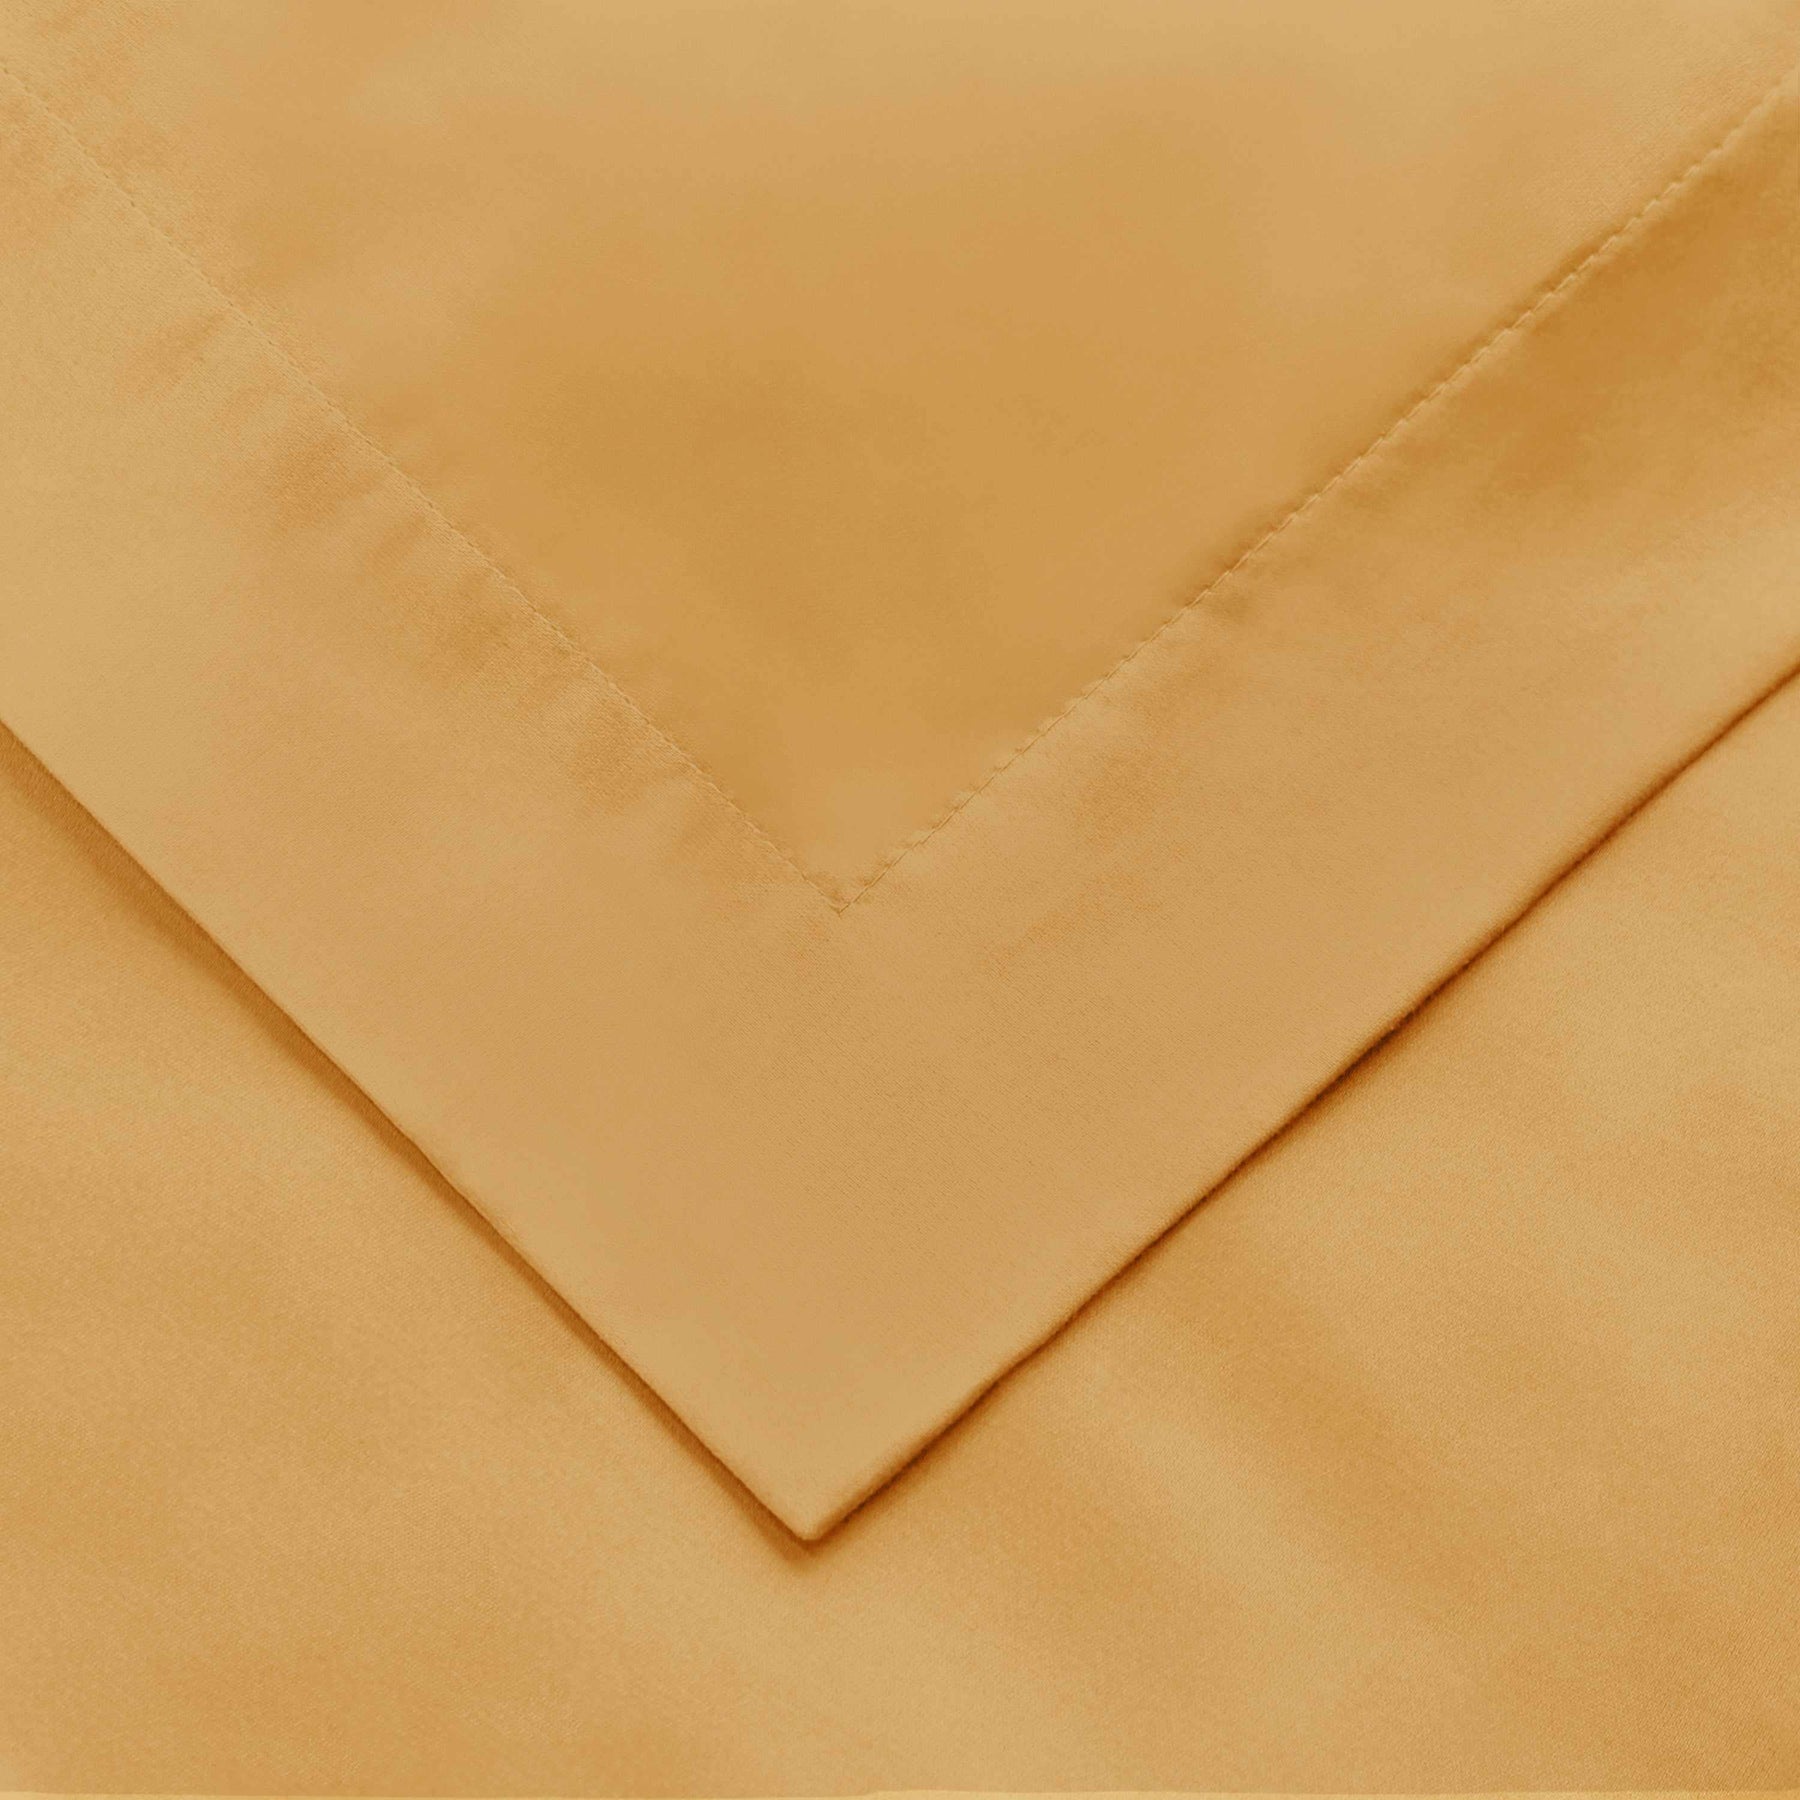  Superior Egyptian Cotton Solid All-Season Duvet Cover Set with Button Closure - Gold